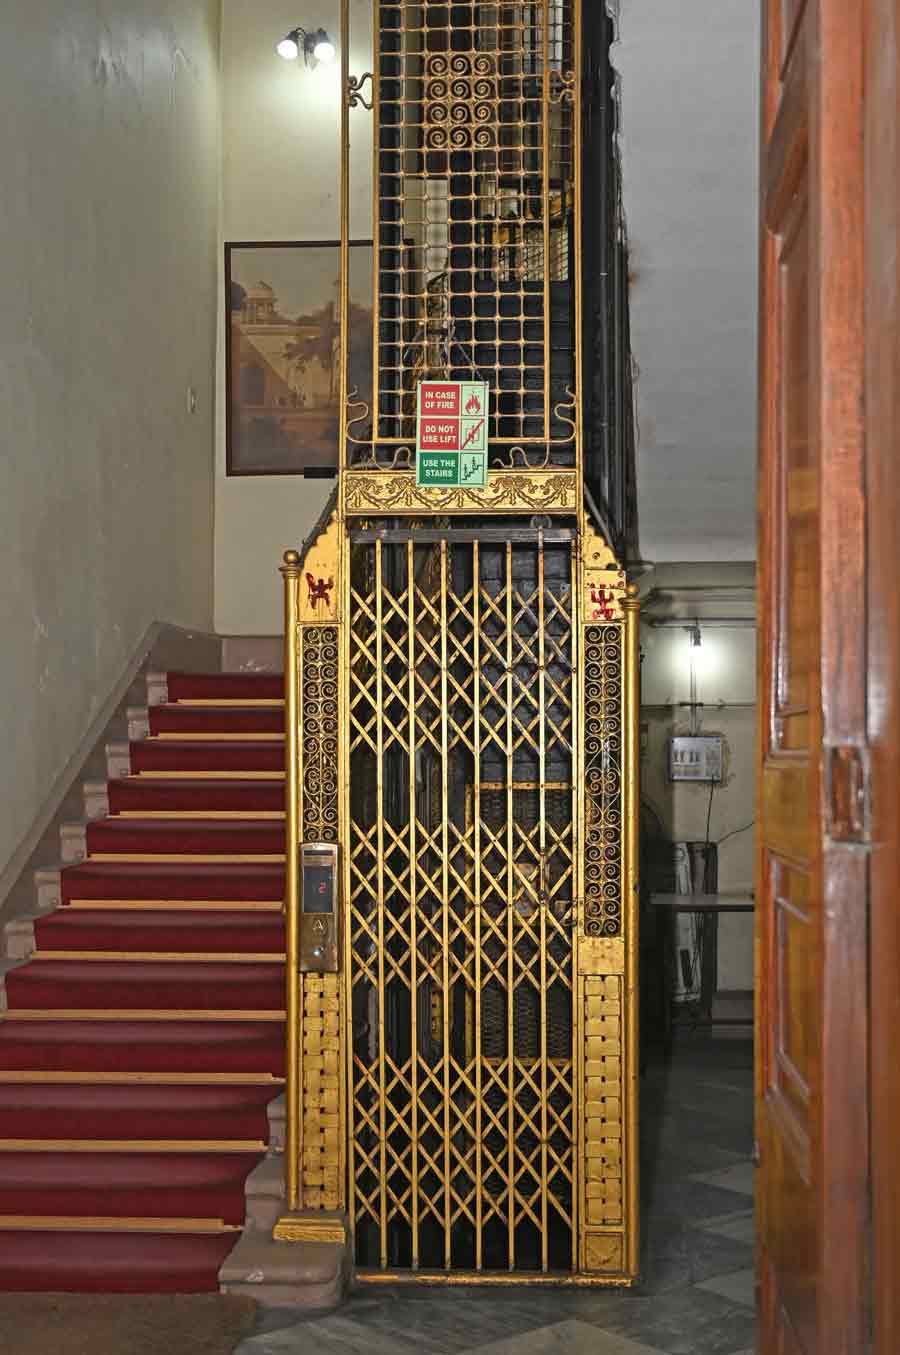 Asia’s first lift was installed at the Raj Bhavan and is functional to this day. This golden birdcage lift was installed by Otis Elevator Company in the South West Wing of the building